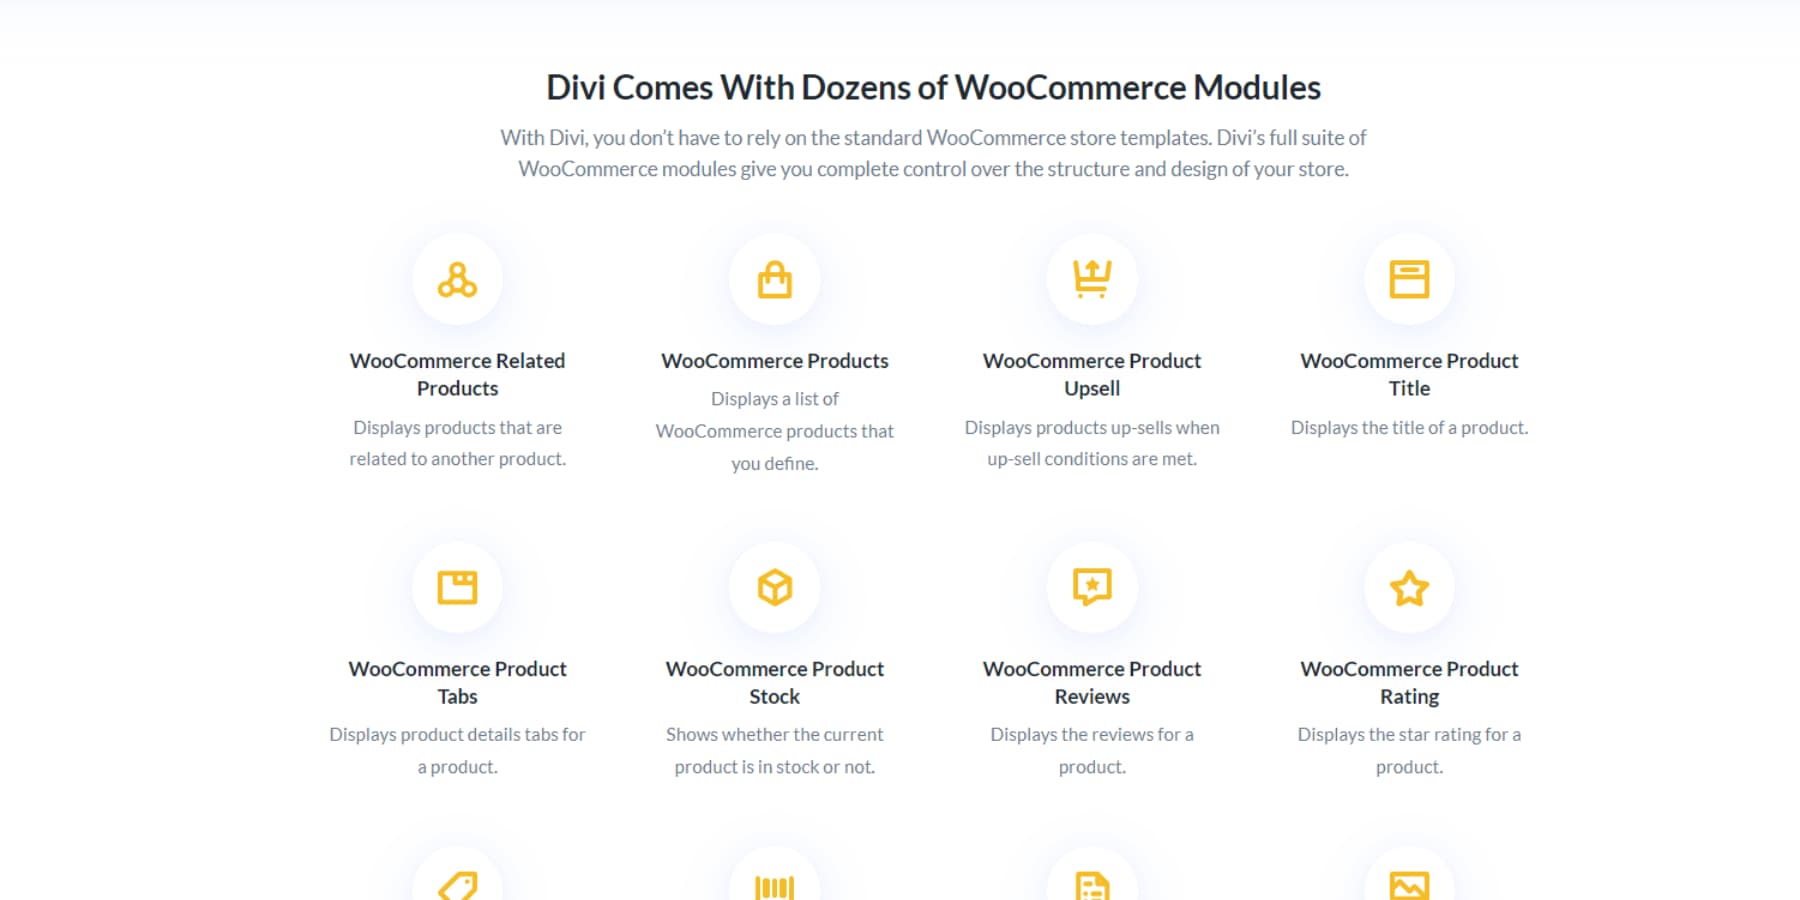 A screenshot of some of Divi's WooCommerce modules